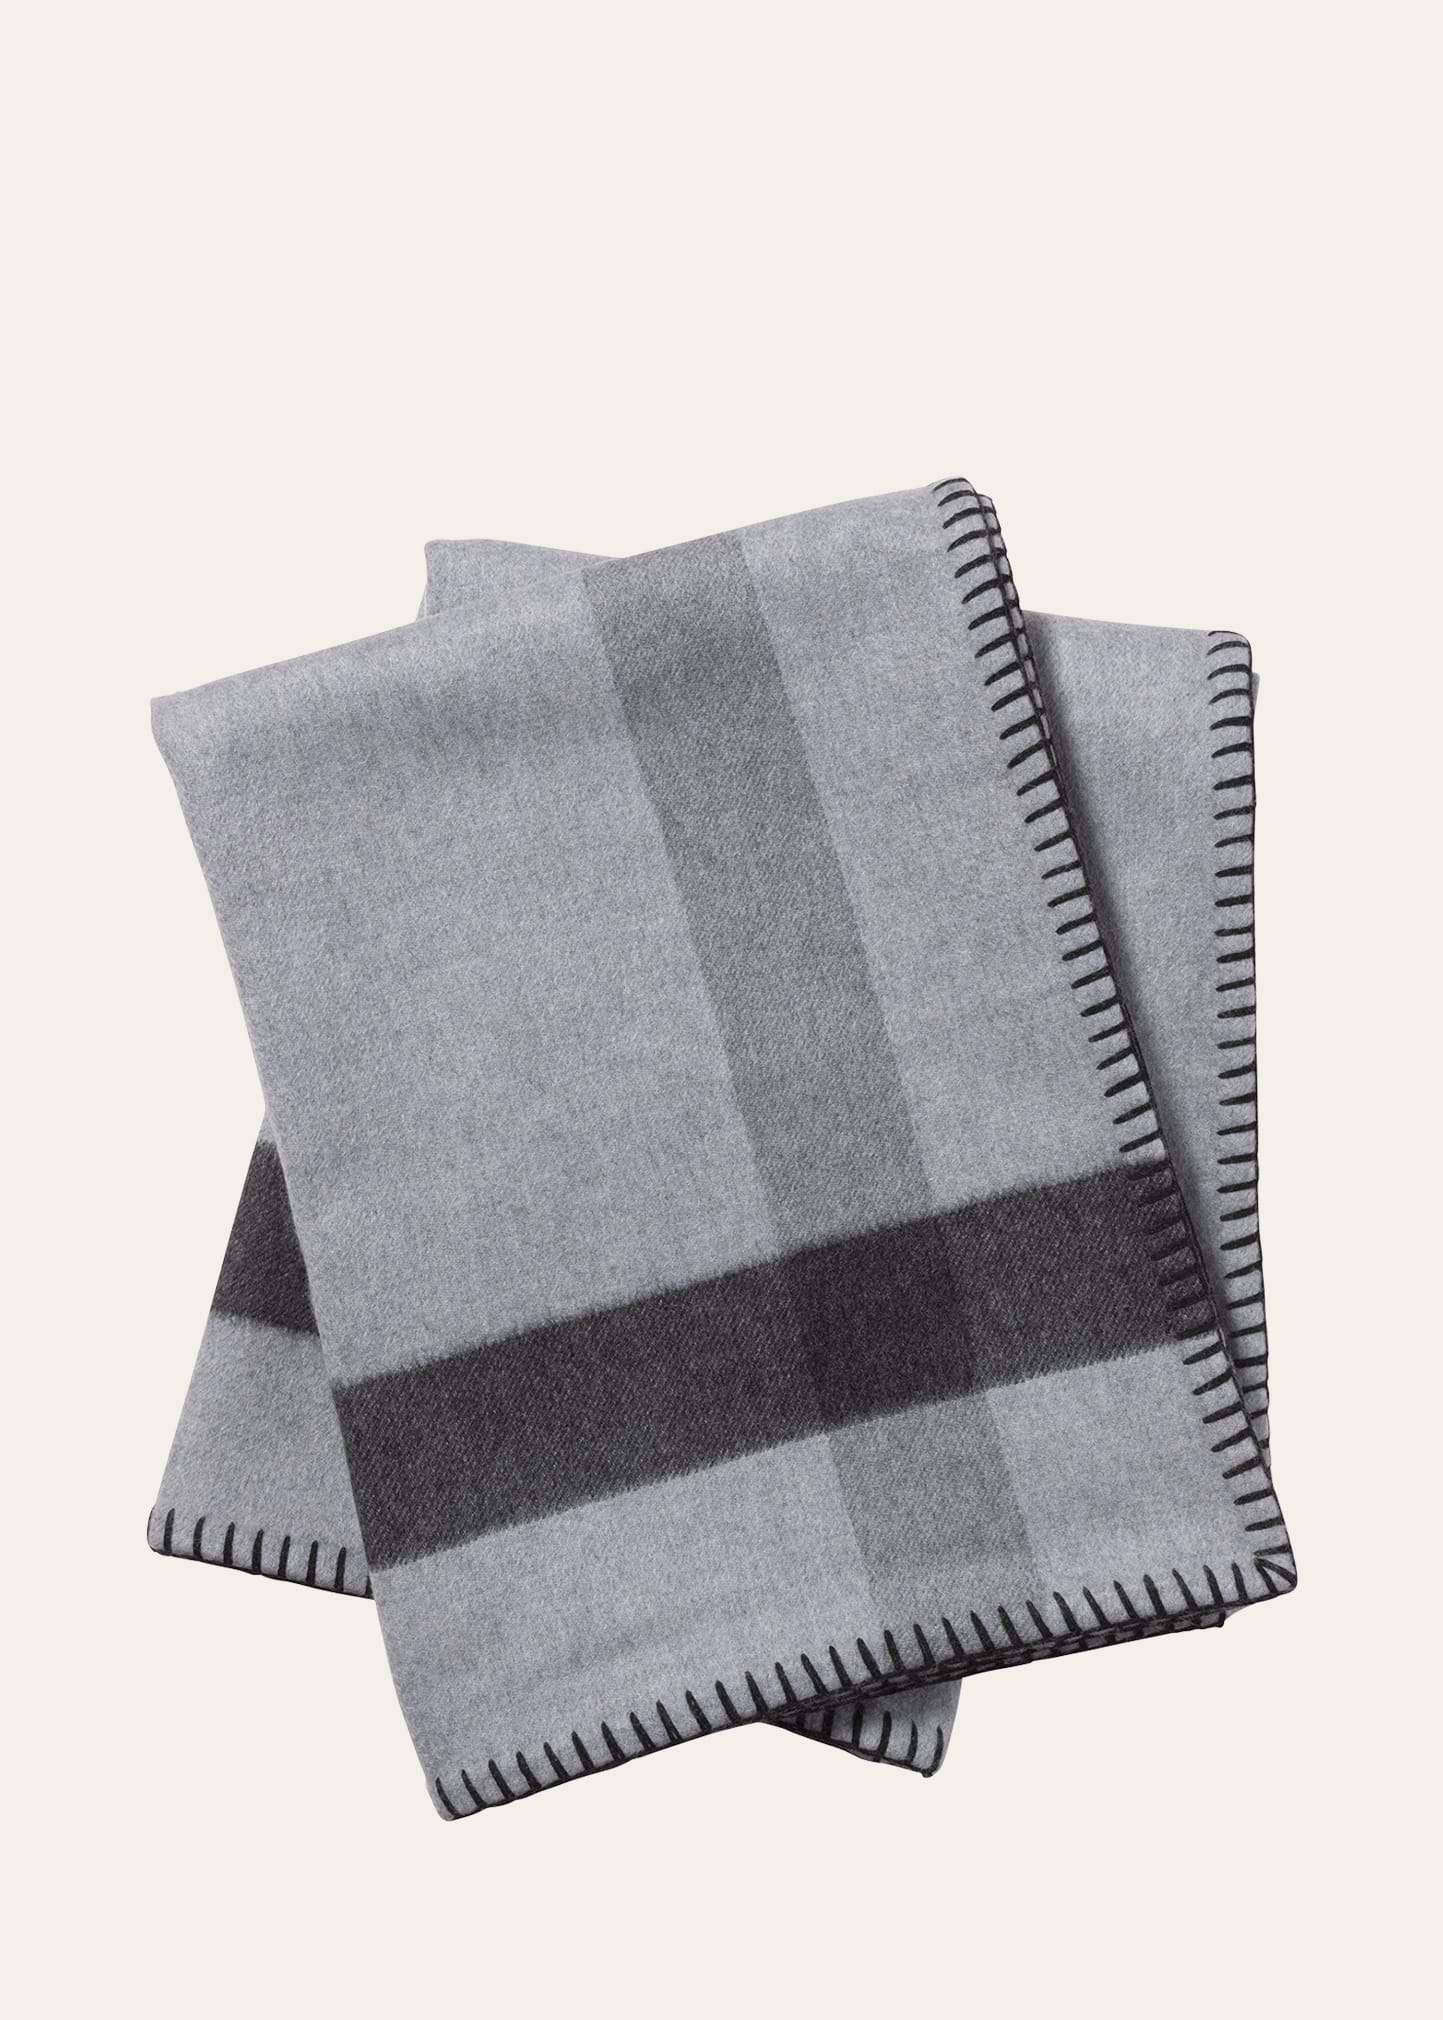 Sofia Cashmere Double-face Cashmere Throw Blanket, 56" X 72" In Gray